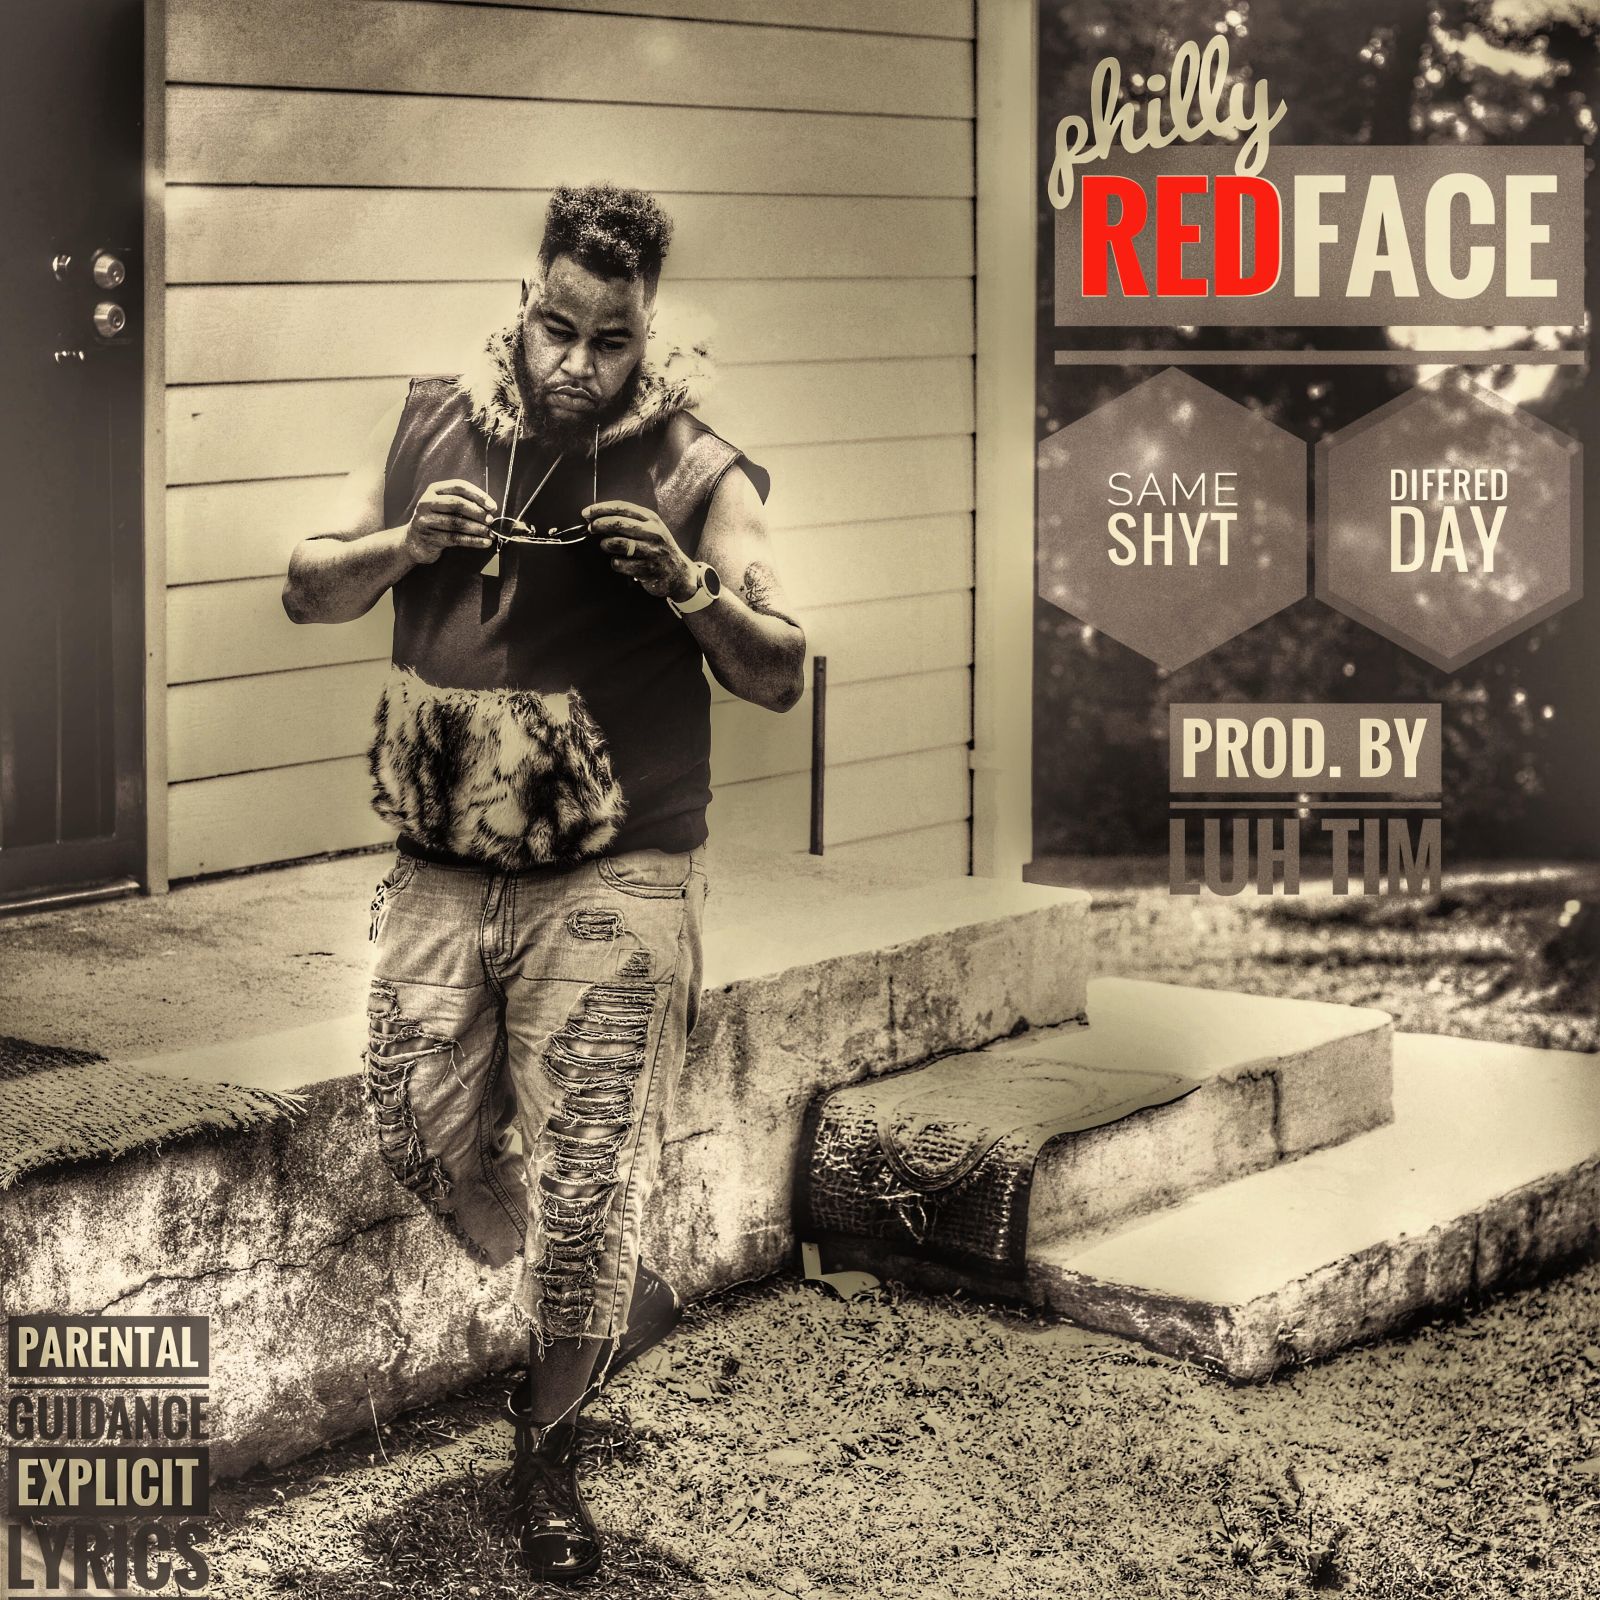 Stream Philly Redface ‘Same Shyt DiffRed Day’ EP [Philly2DaA Movement]